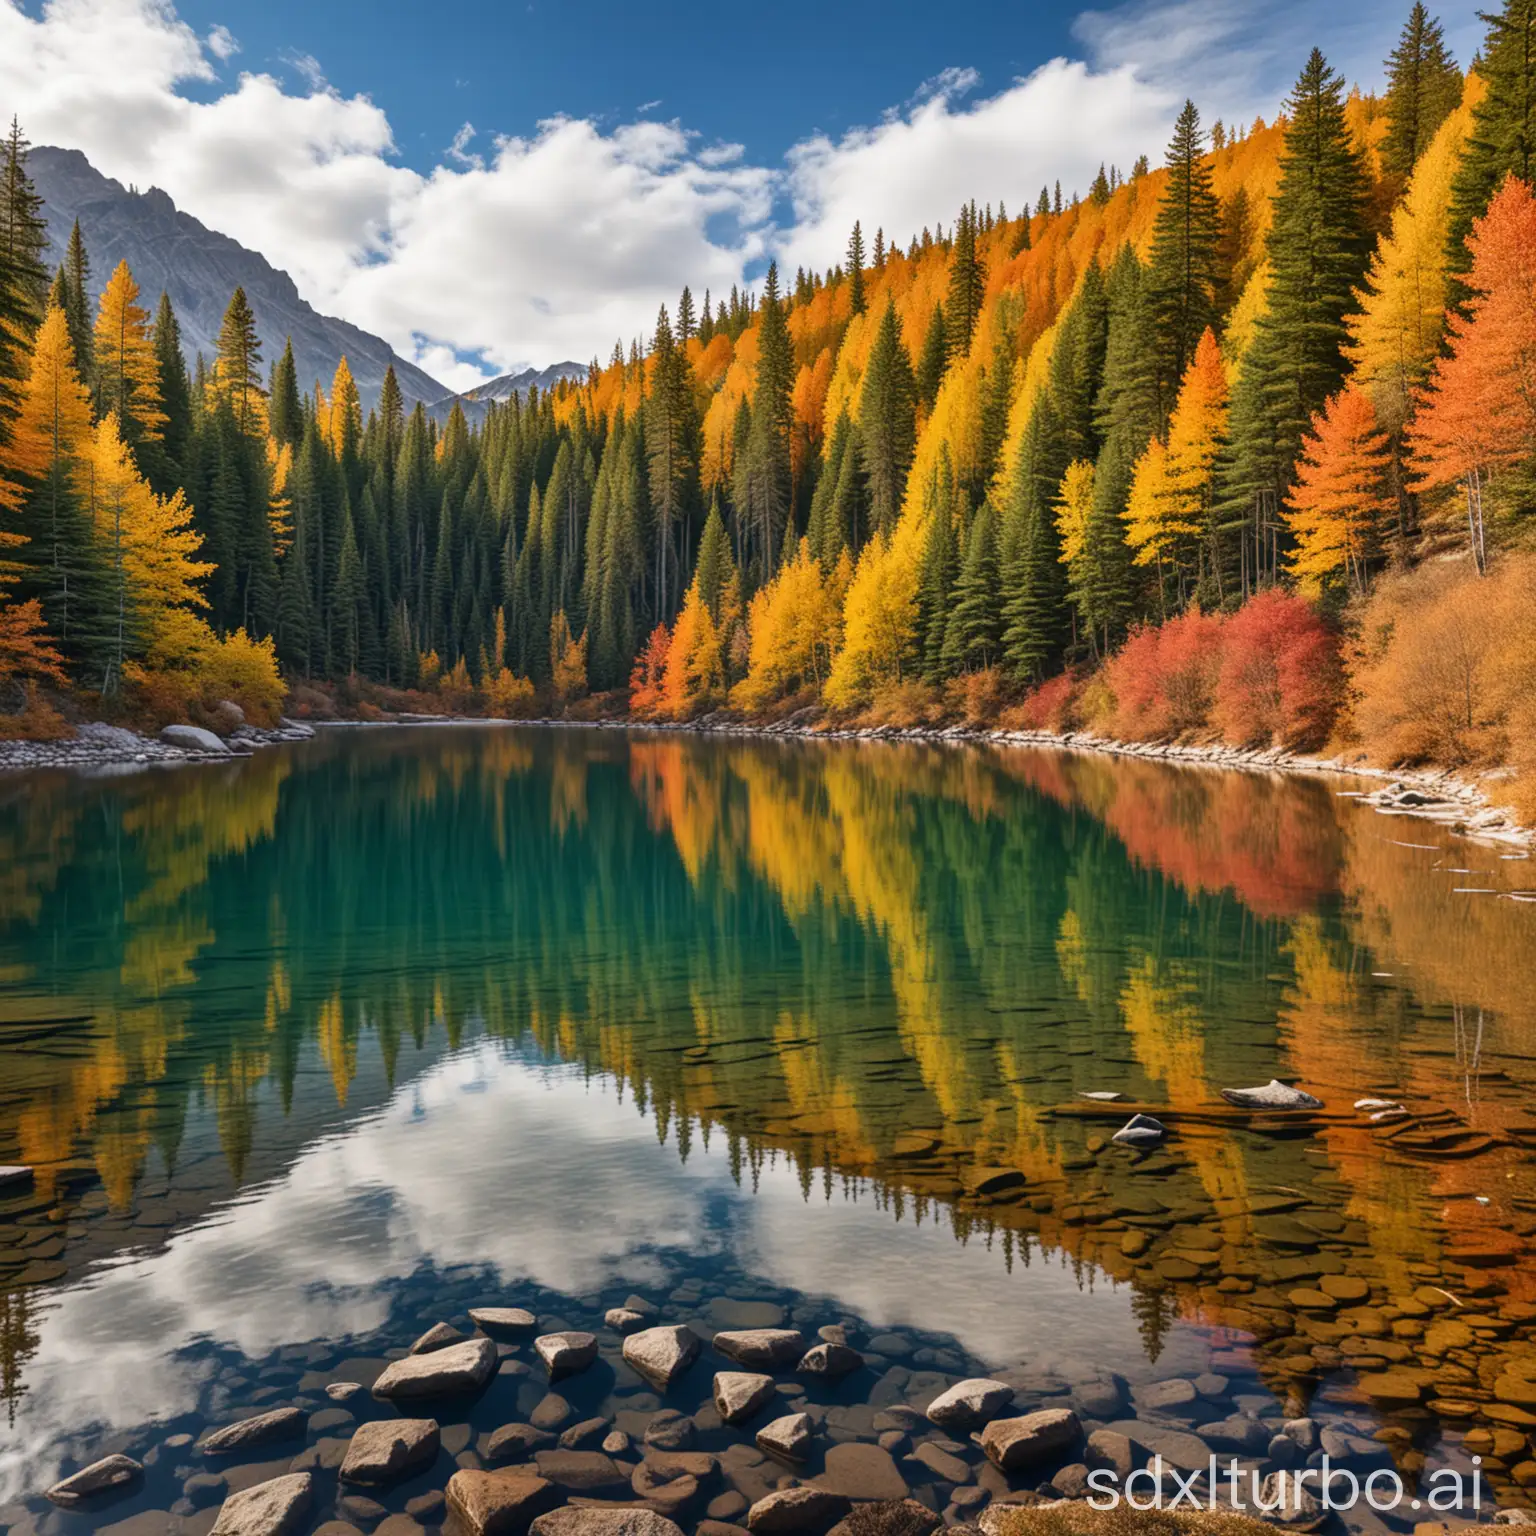 Tranquil-Mountain-Lake-Surrounded-by-Autumn-Foliage